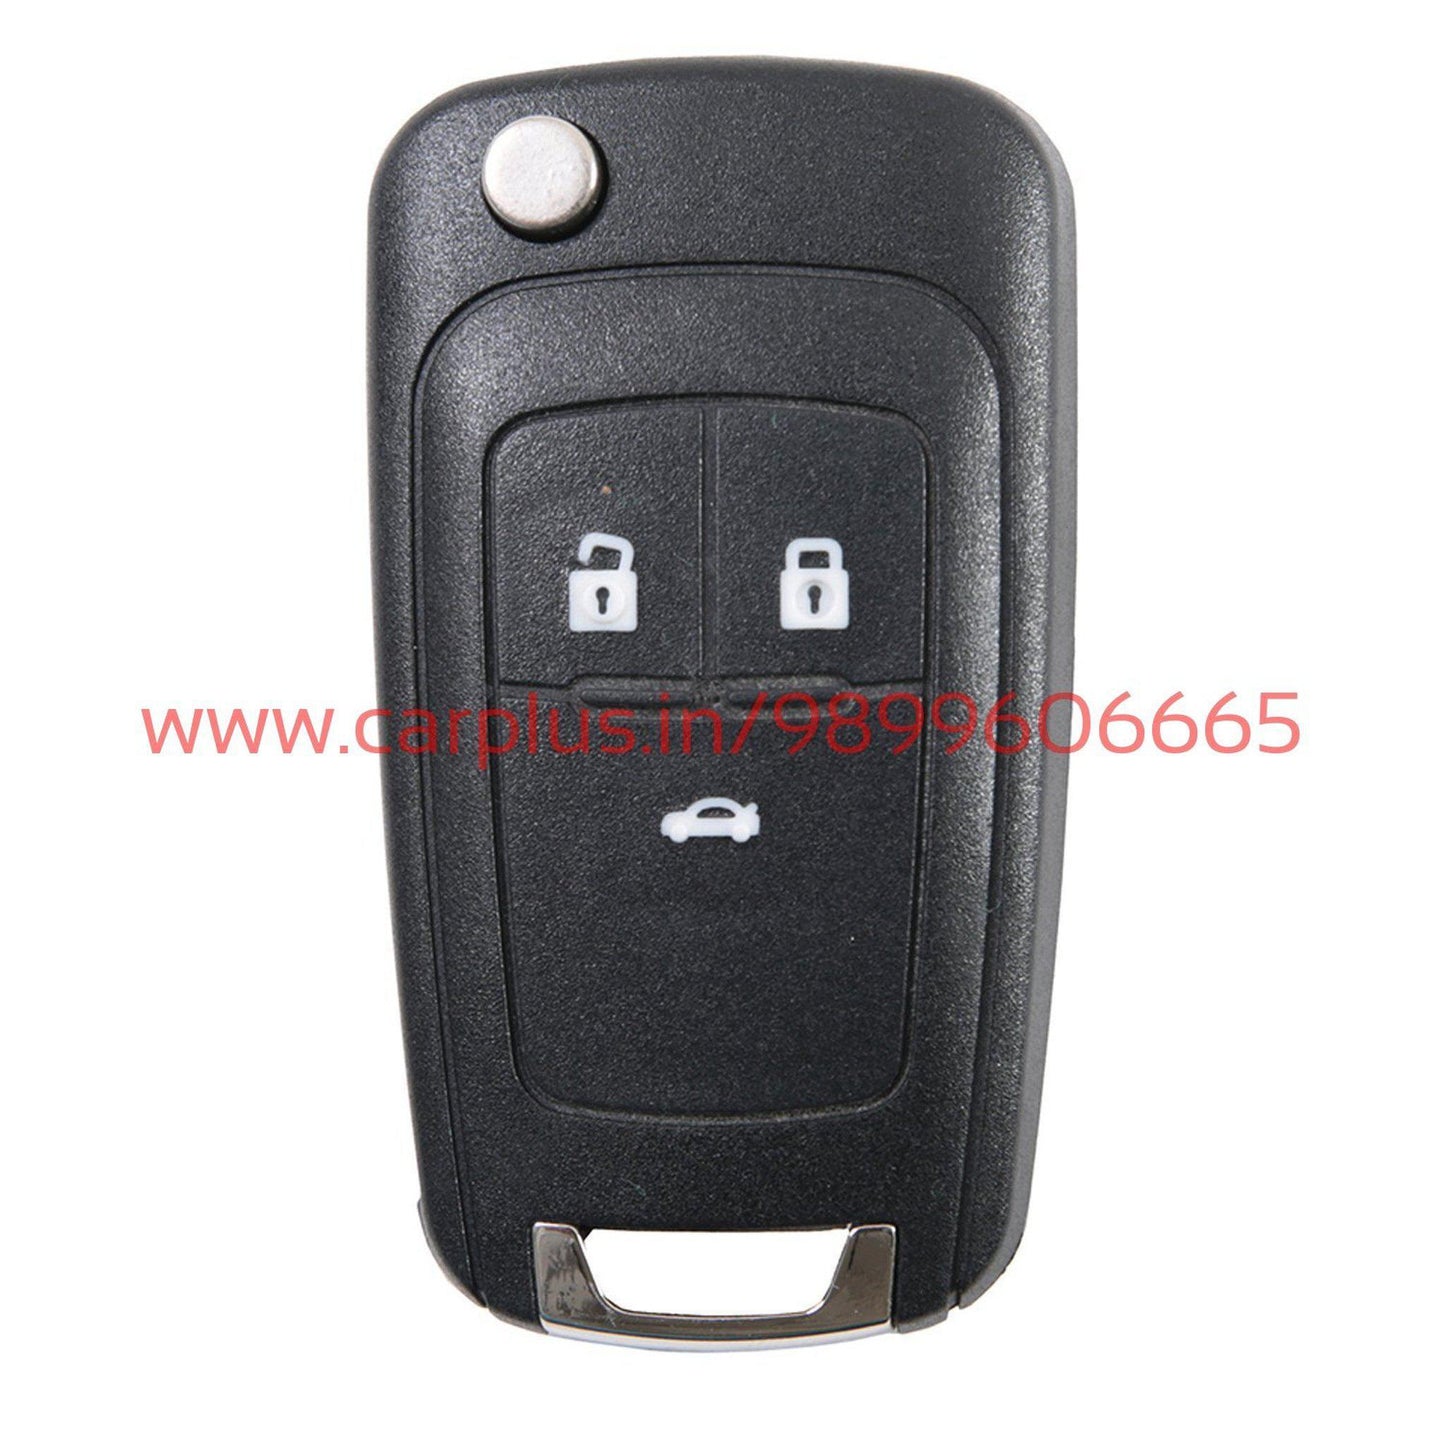 
                  
                    KMH Replacement Key Shell Front & Back For Chevrolet Cruze KMH-REPLACEMENT KEY SHELL REPLACEMENT KEY SHELL.
                  
                